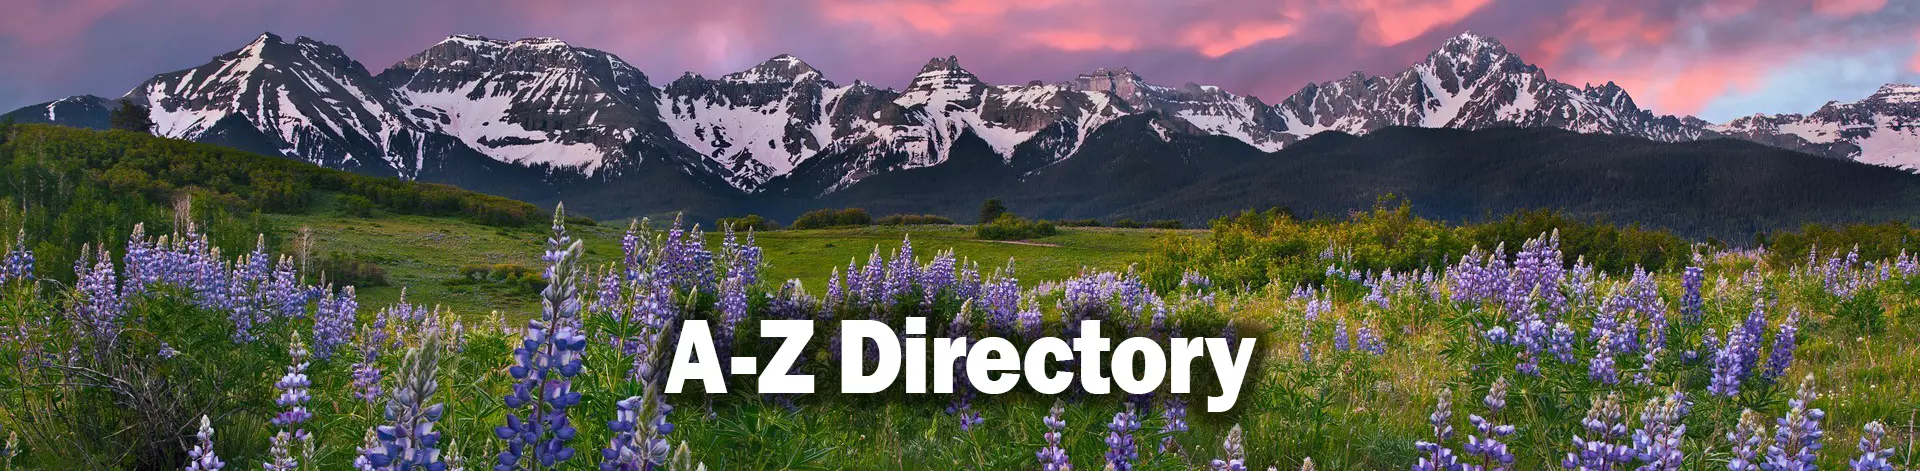 Landscape view of Colorado mountains with a field of lilacs. The words A - Z Directory is an overlay on the meadow.